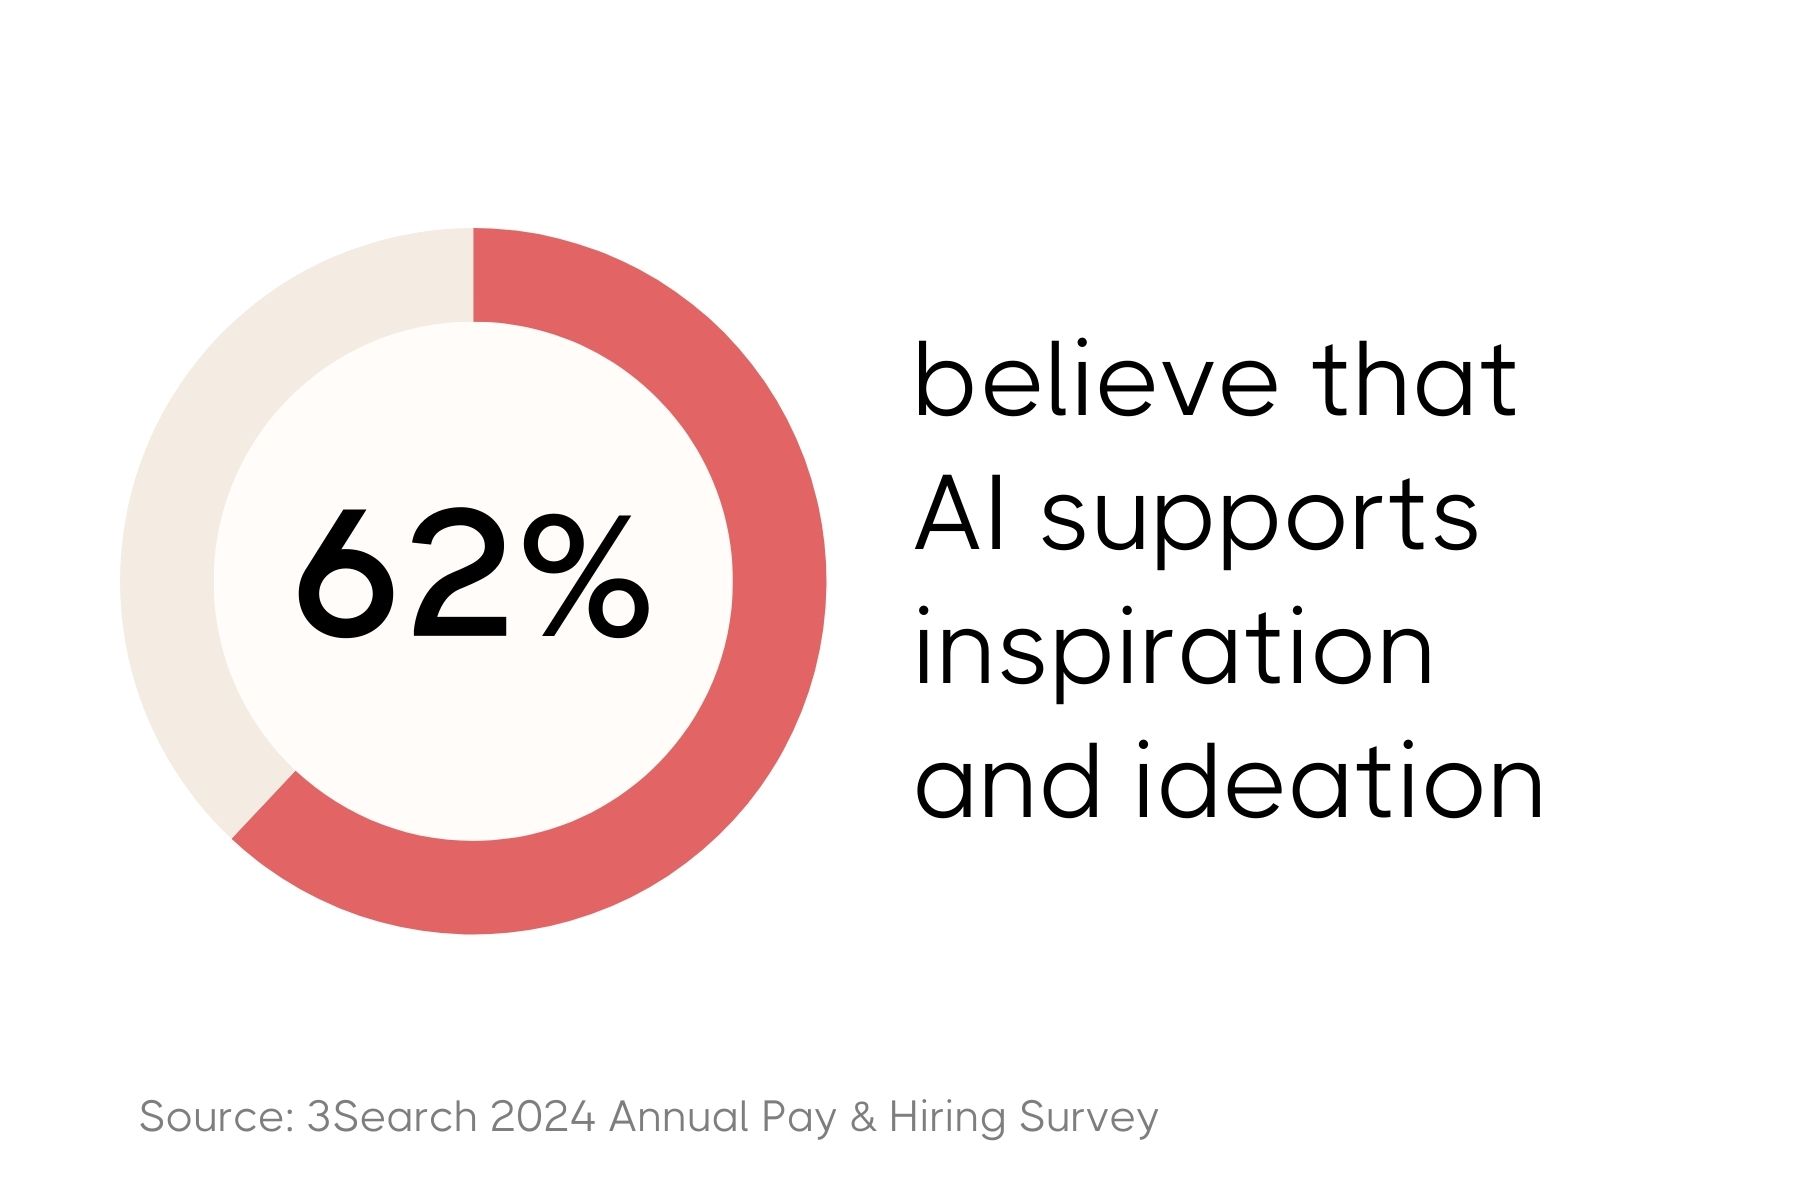 A pie chart graphic indicating that 62% of respondents believe AI supports inspiration and ideation, sourced from the '3Search 2024 Annual Pay & Hiring Survey.' The chart features a significant red segment against a gray background.